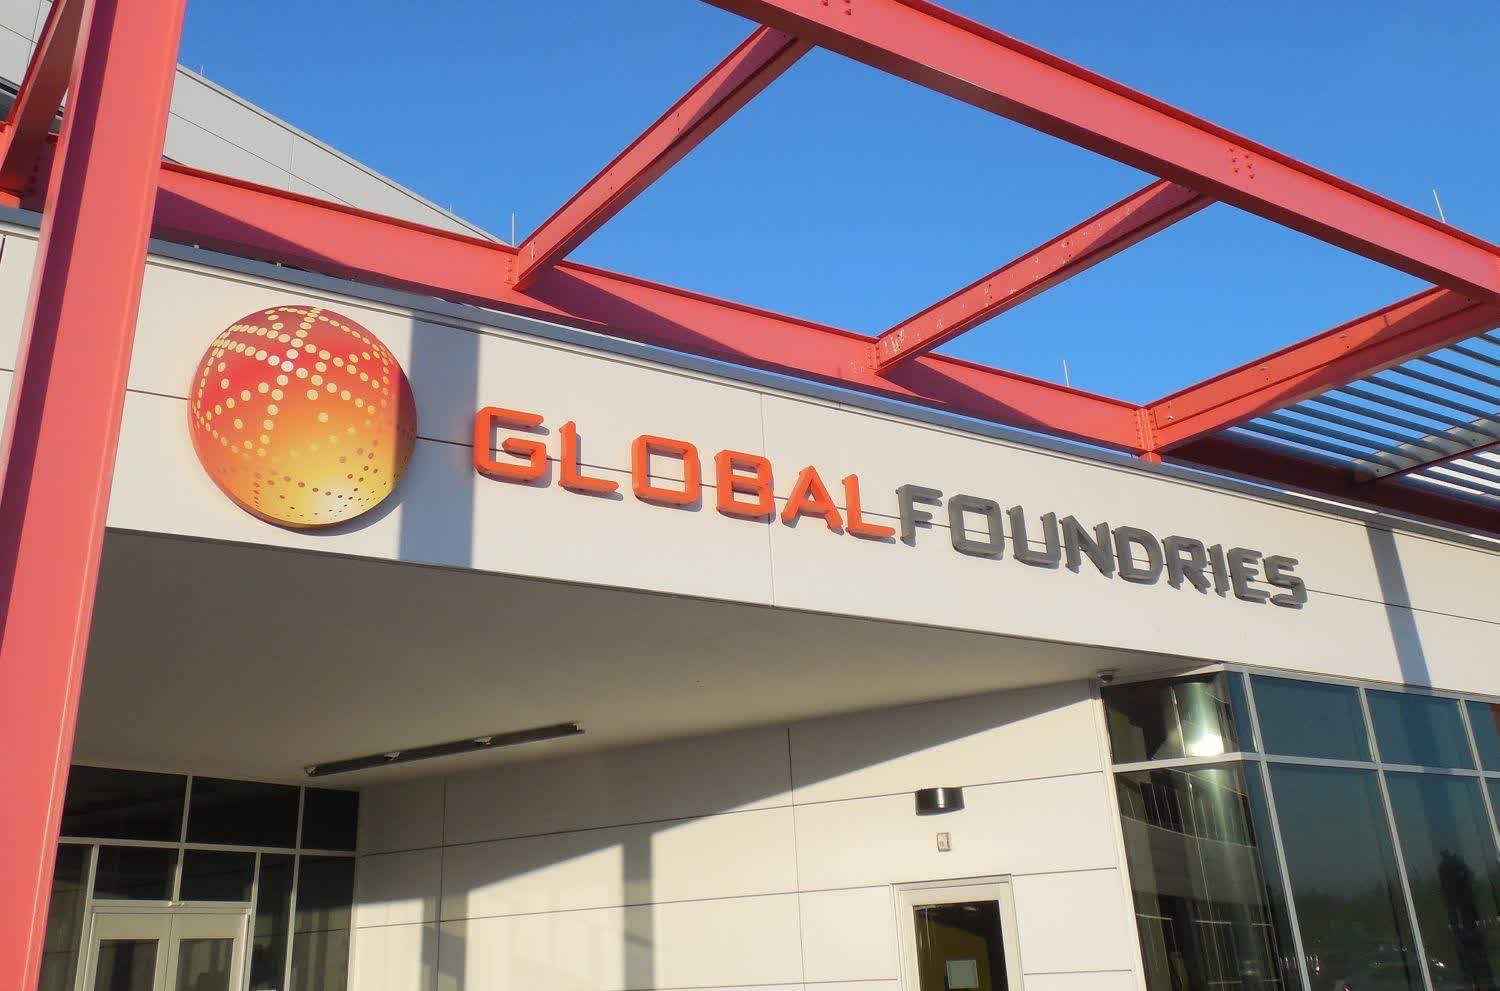 Qualcomm extends GlobalFoundries semiconductor partnership through 2028